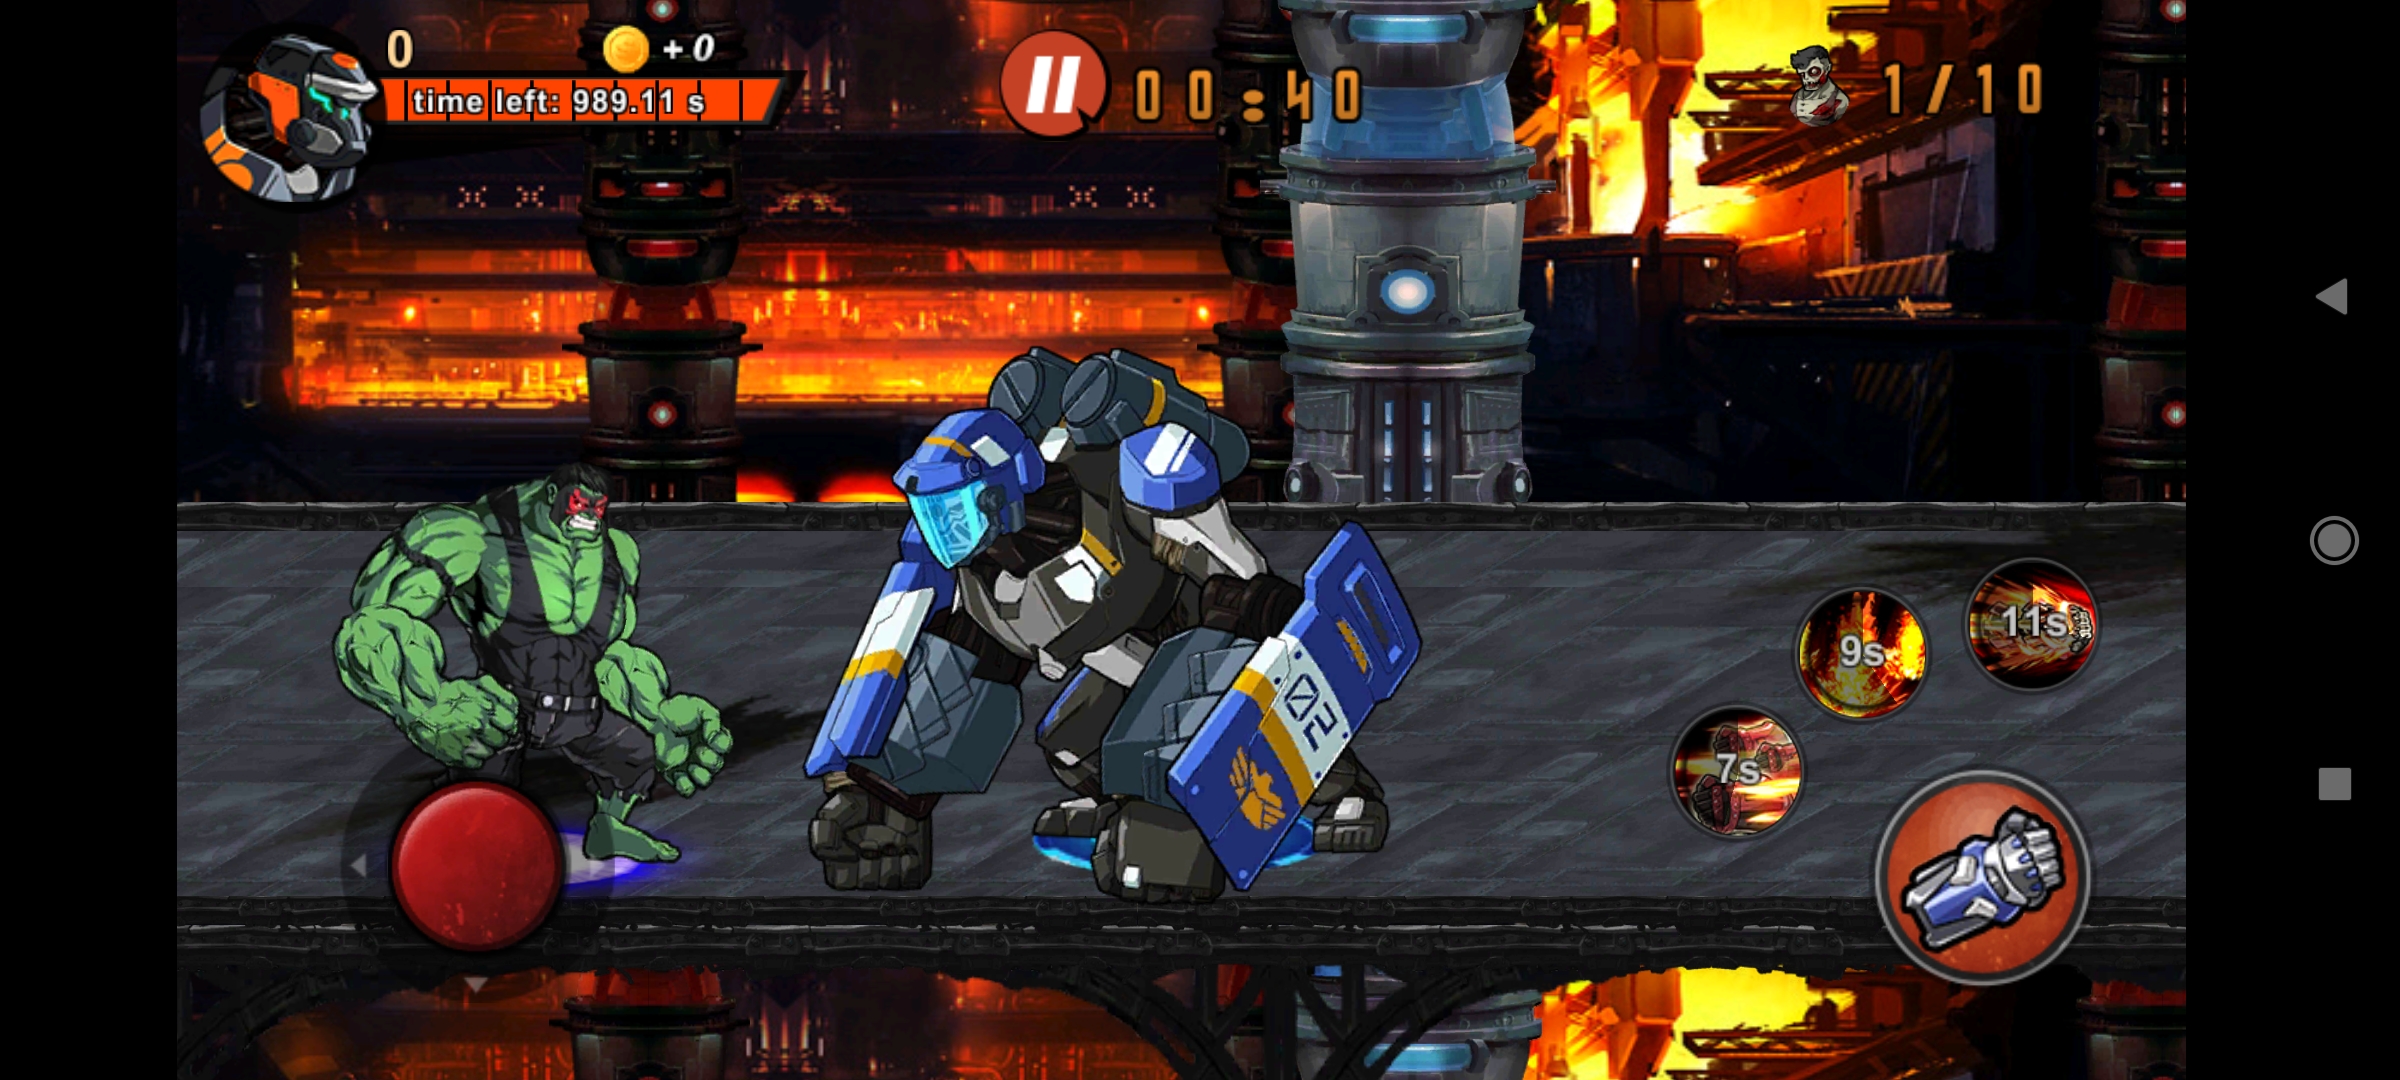 Game Mecha Agent Cho Android